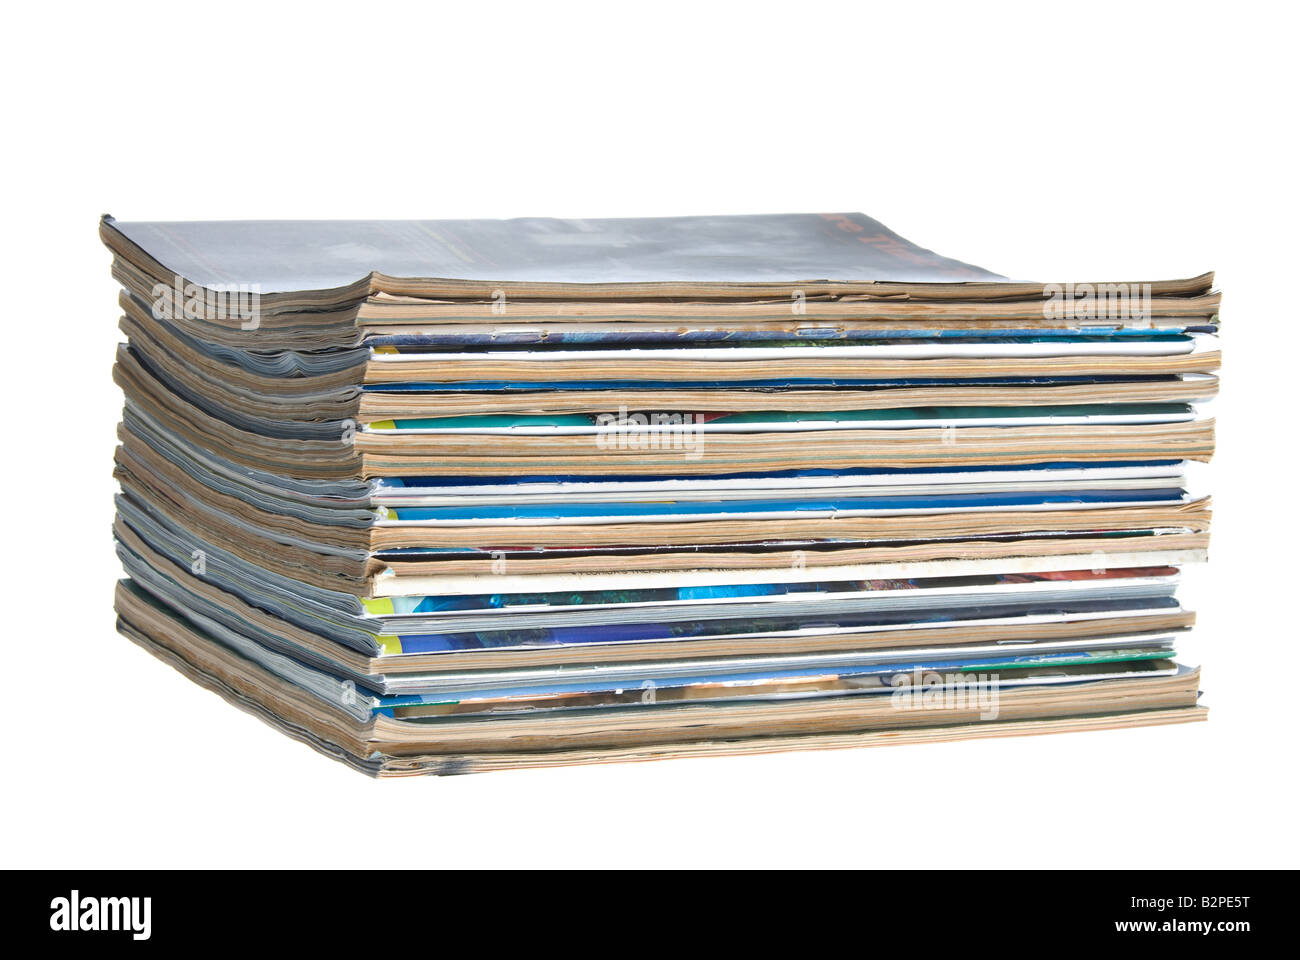 A stack of old worn magazines isolated against a white background Stock Photo